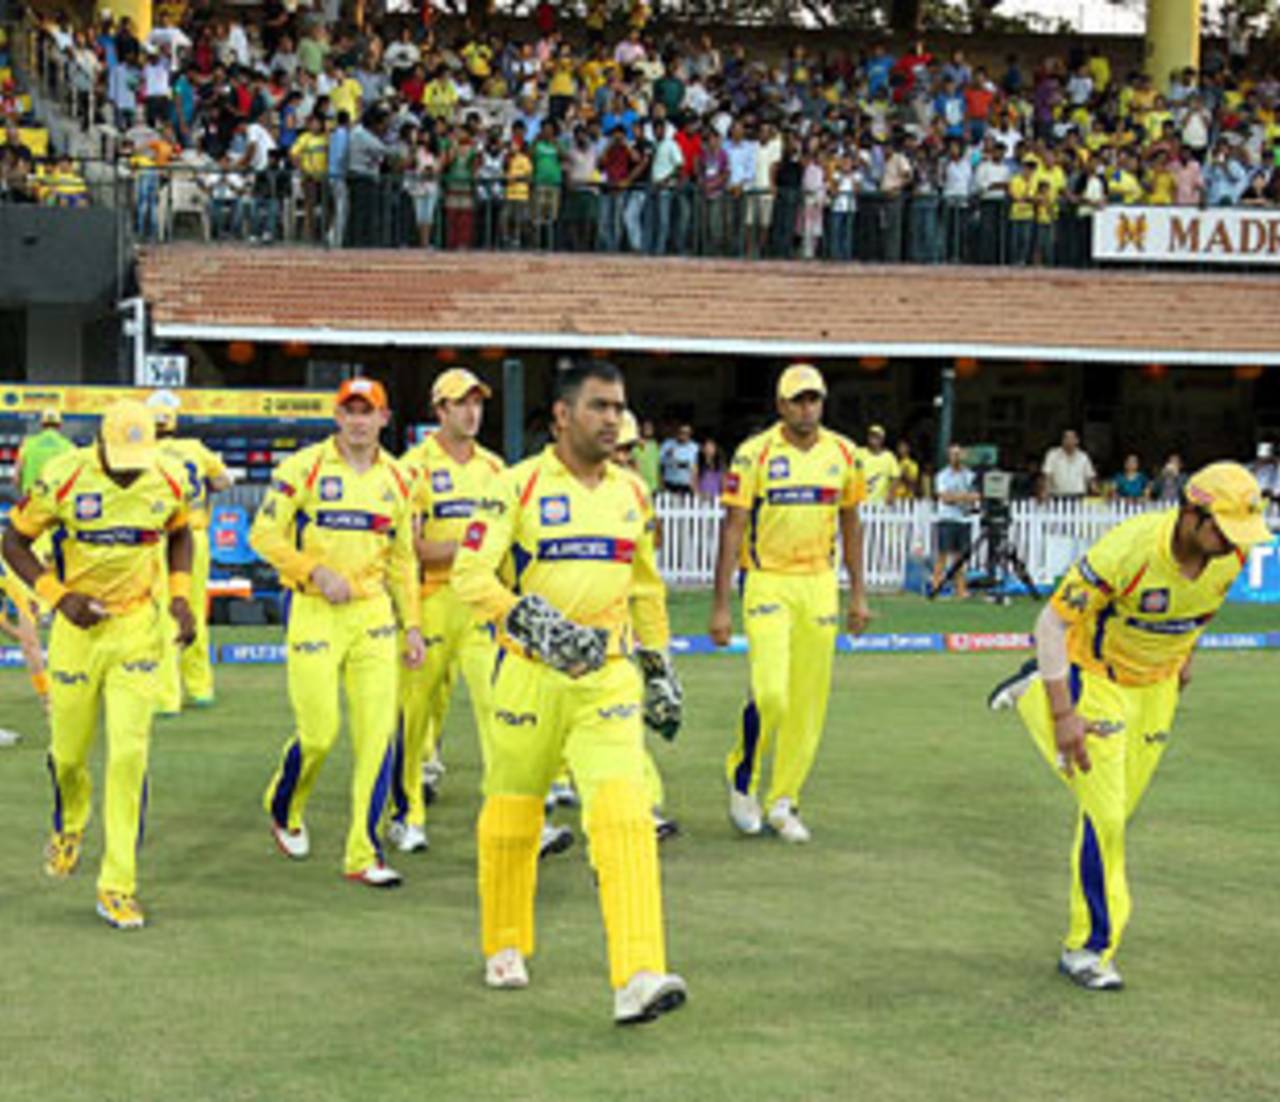 Chennai Super Kings walk on to the field, Chennai Super Kings v Kings XI Punjab, IPL 2013, Chennai, May 2, 2013